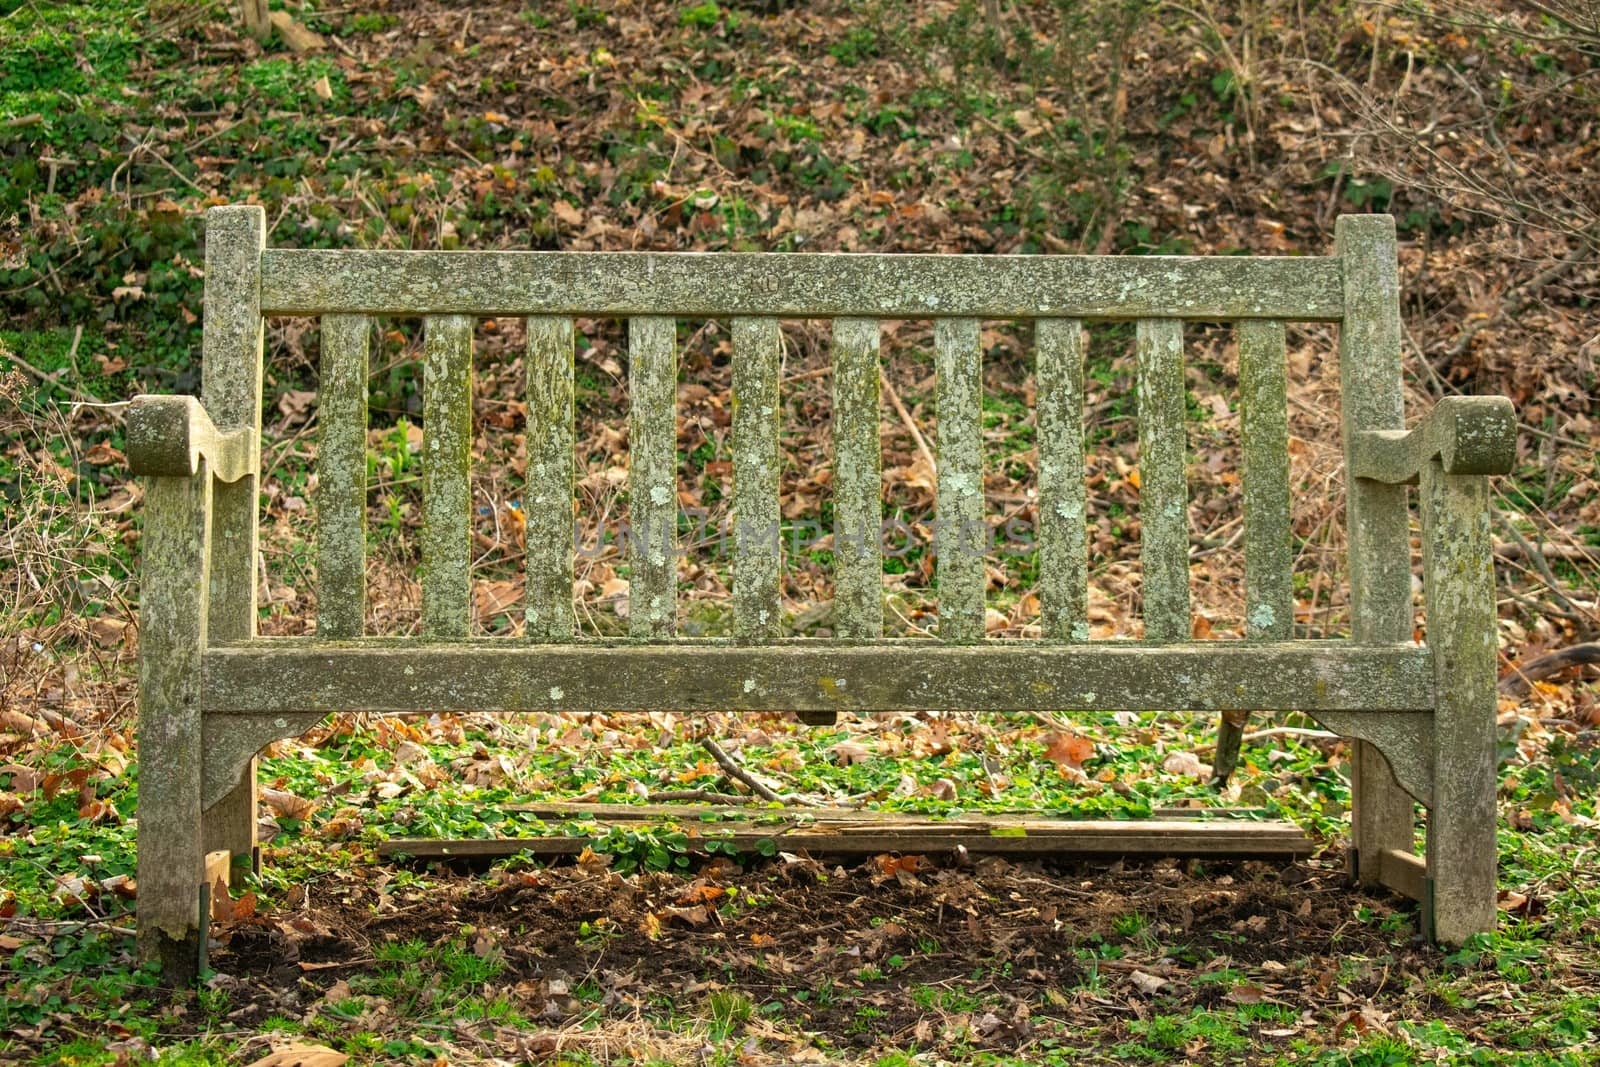 An Old Wooden Park Bench in a Suburban Park in Pennsylvania by bju12290